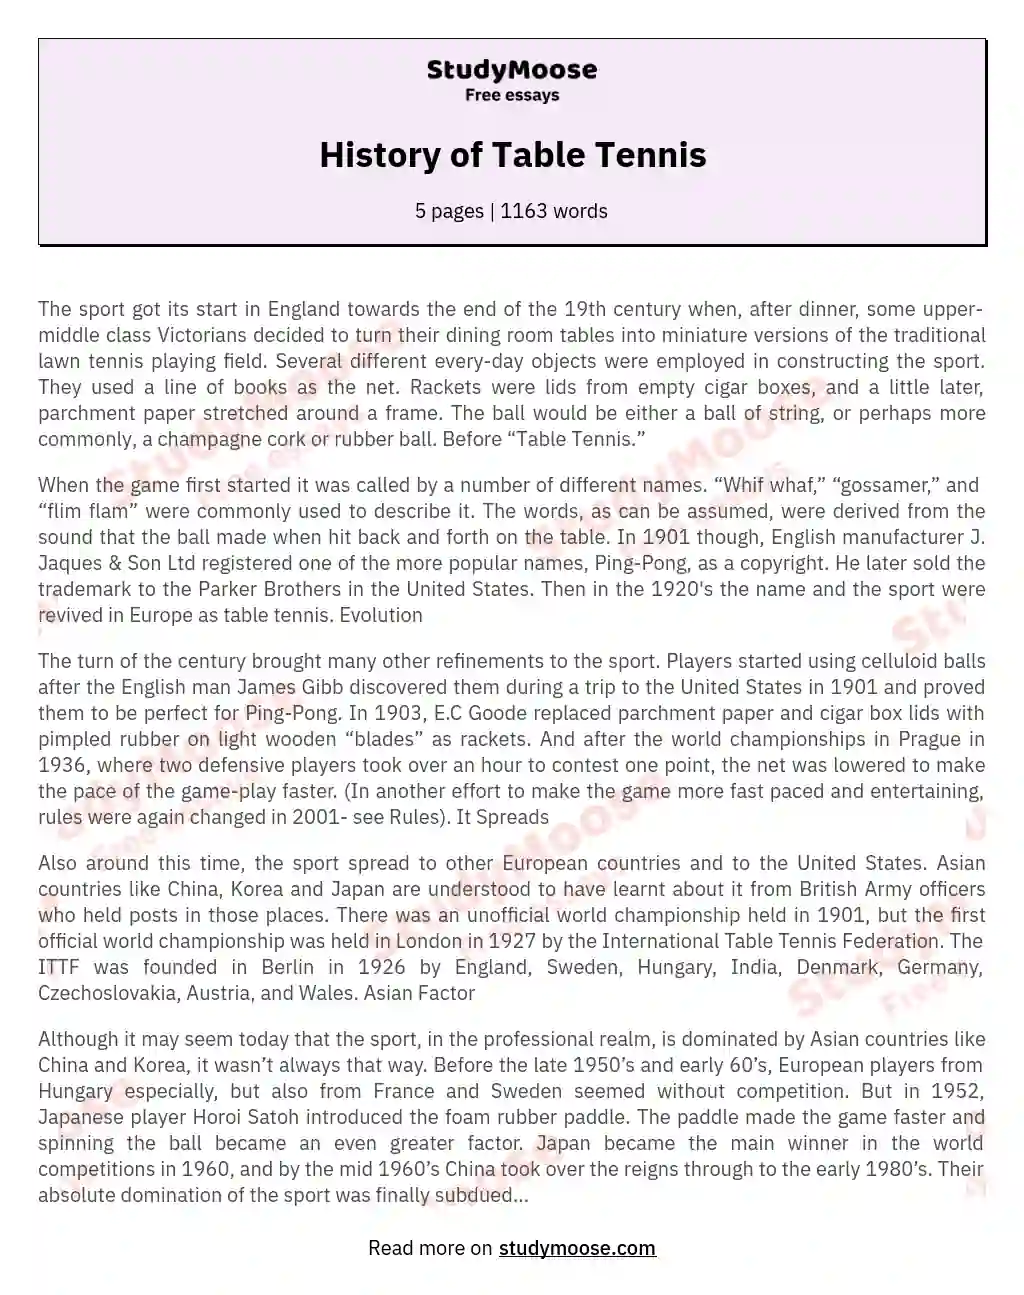 History of Table Tennis essay